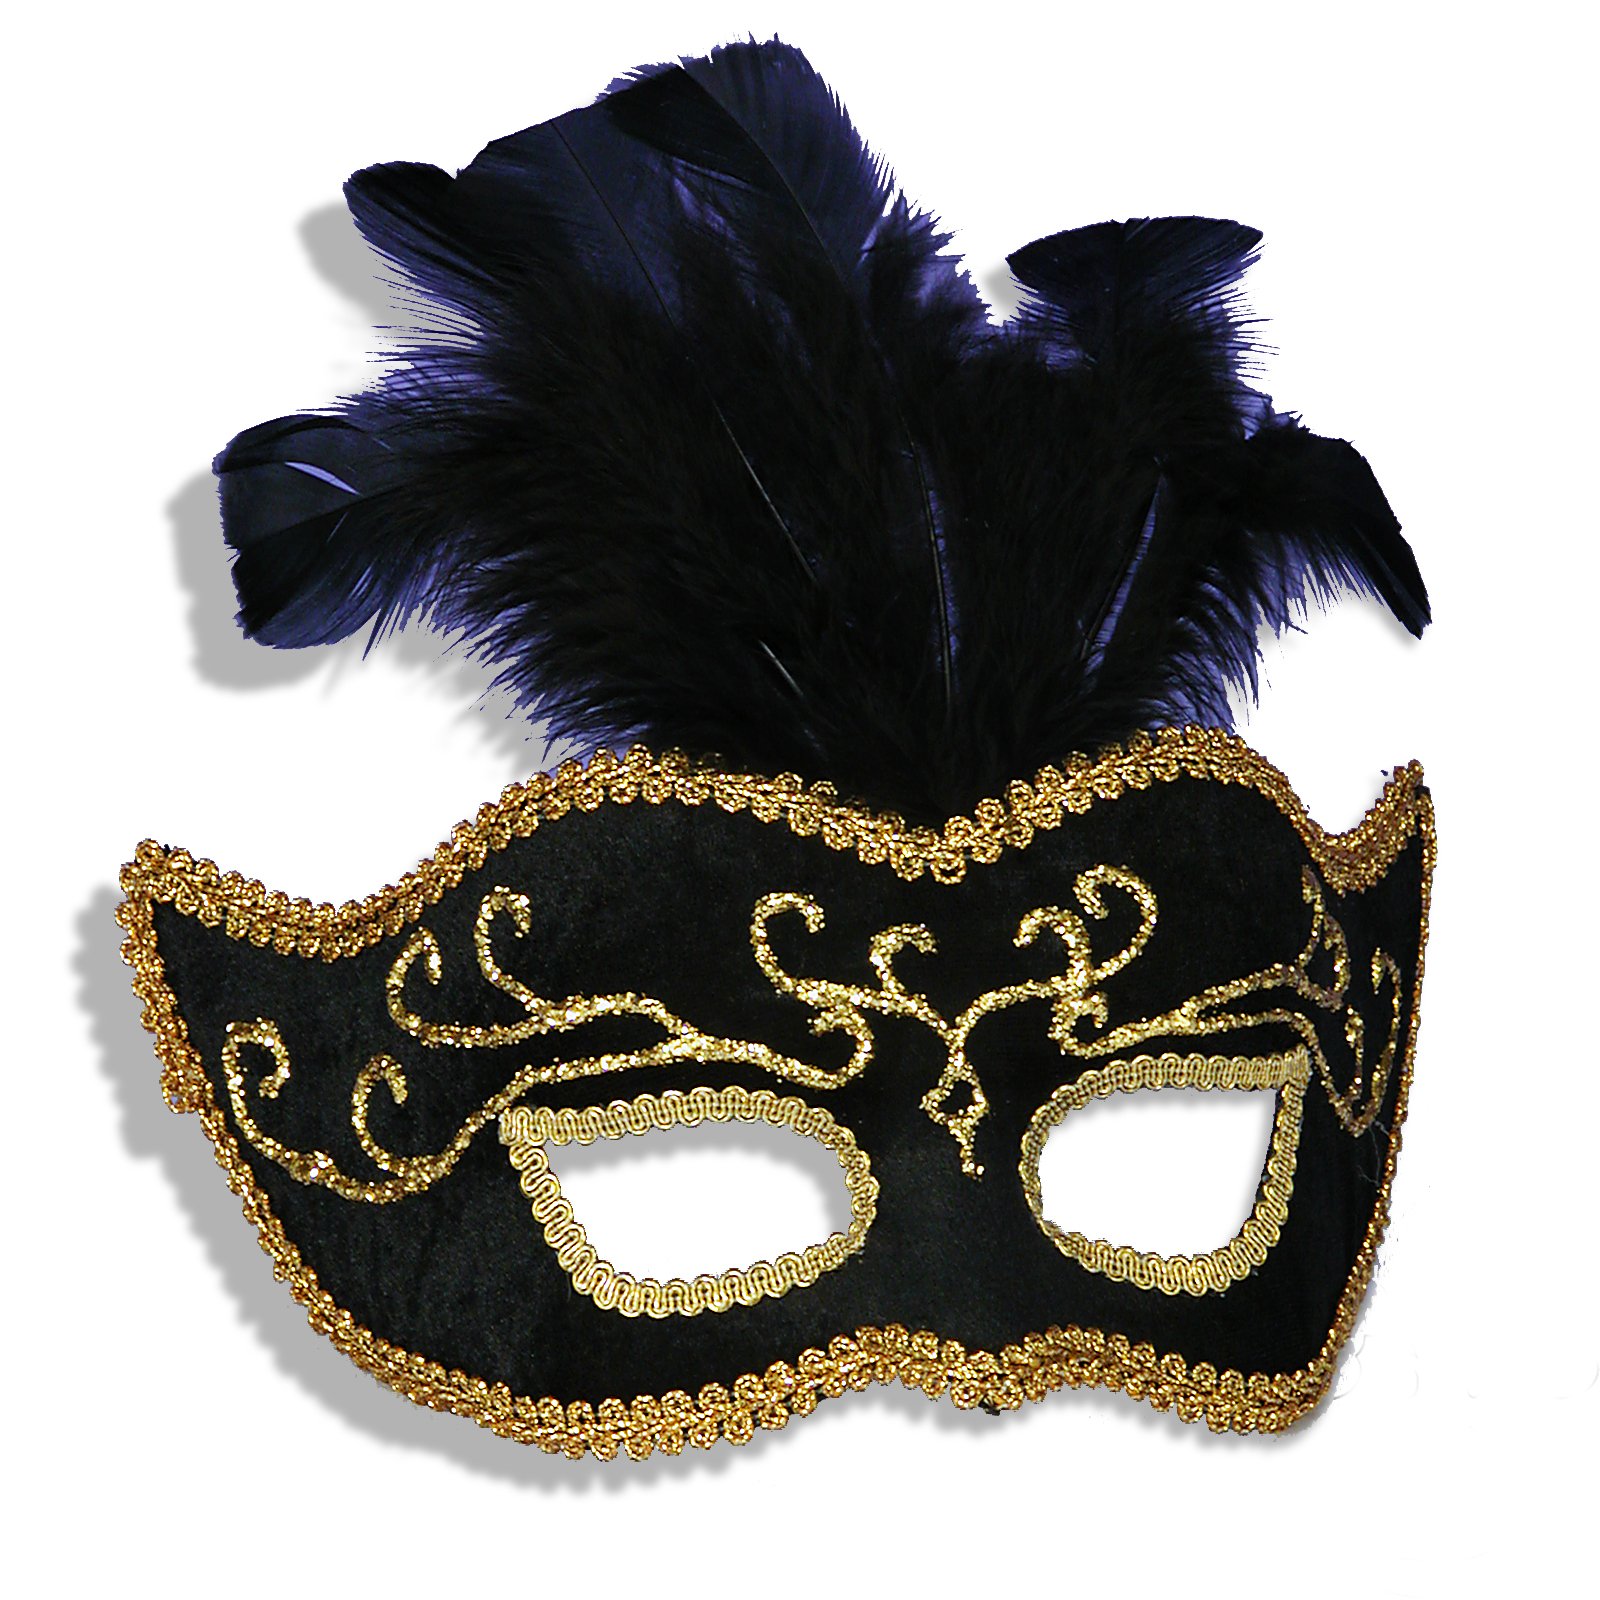 masquerade-masks-going-kookies-with-a-glass-of-milk-half-empty